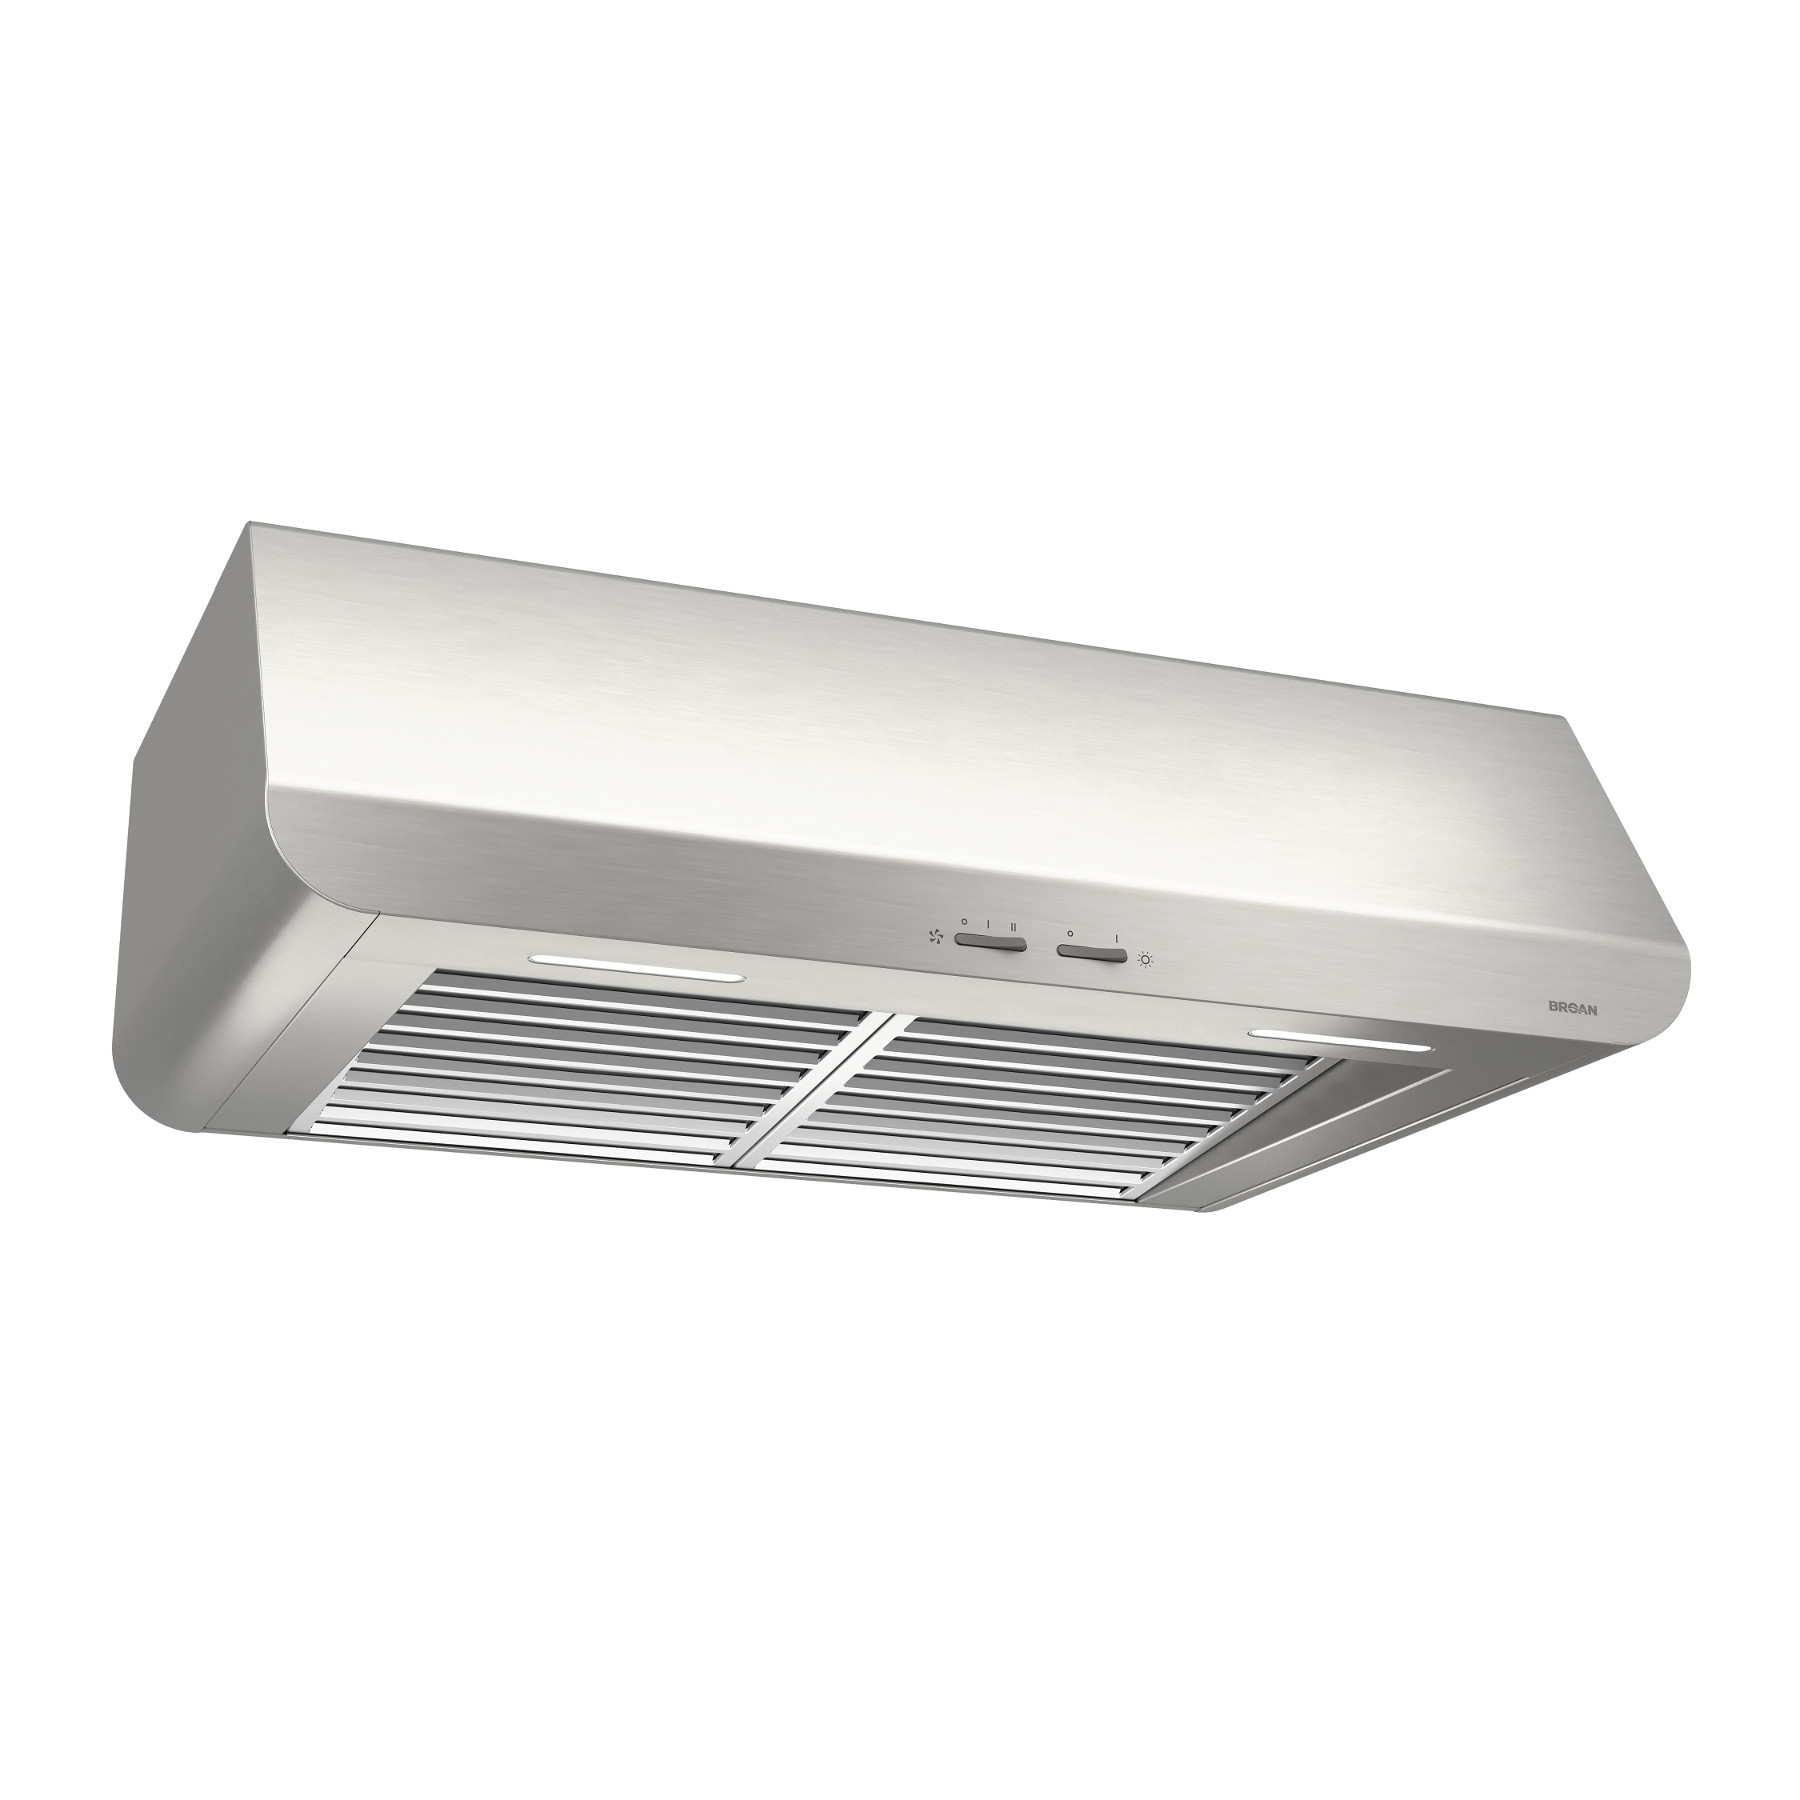 **DISCONTINUED** Broan® Spire 42-Inch Convertible Under-Cabinet Range Hood, 450 Max Blower CFM, Stainless Steel